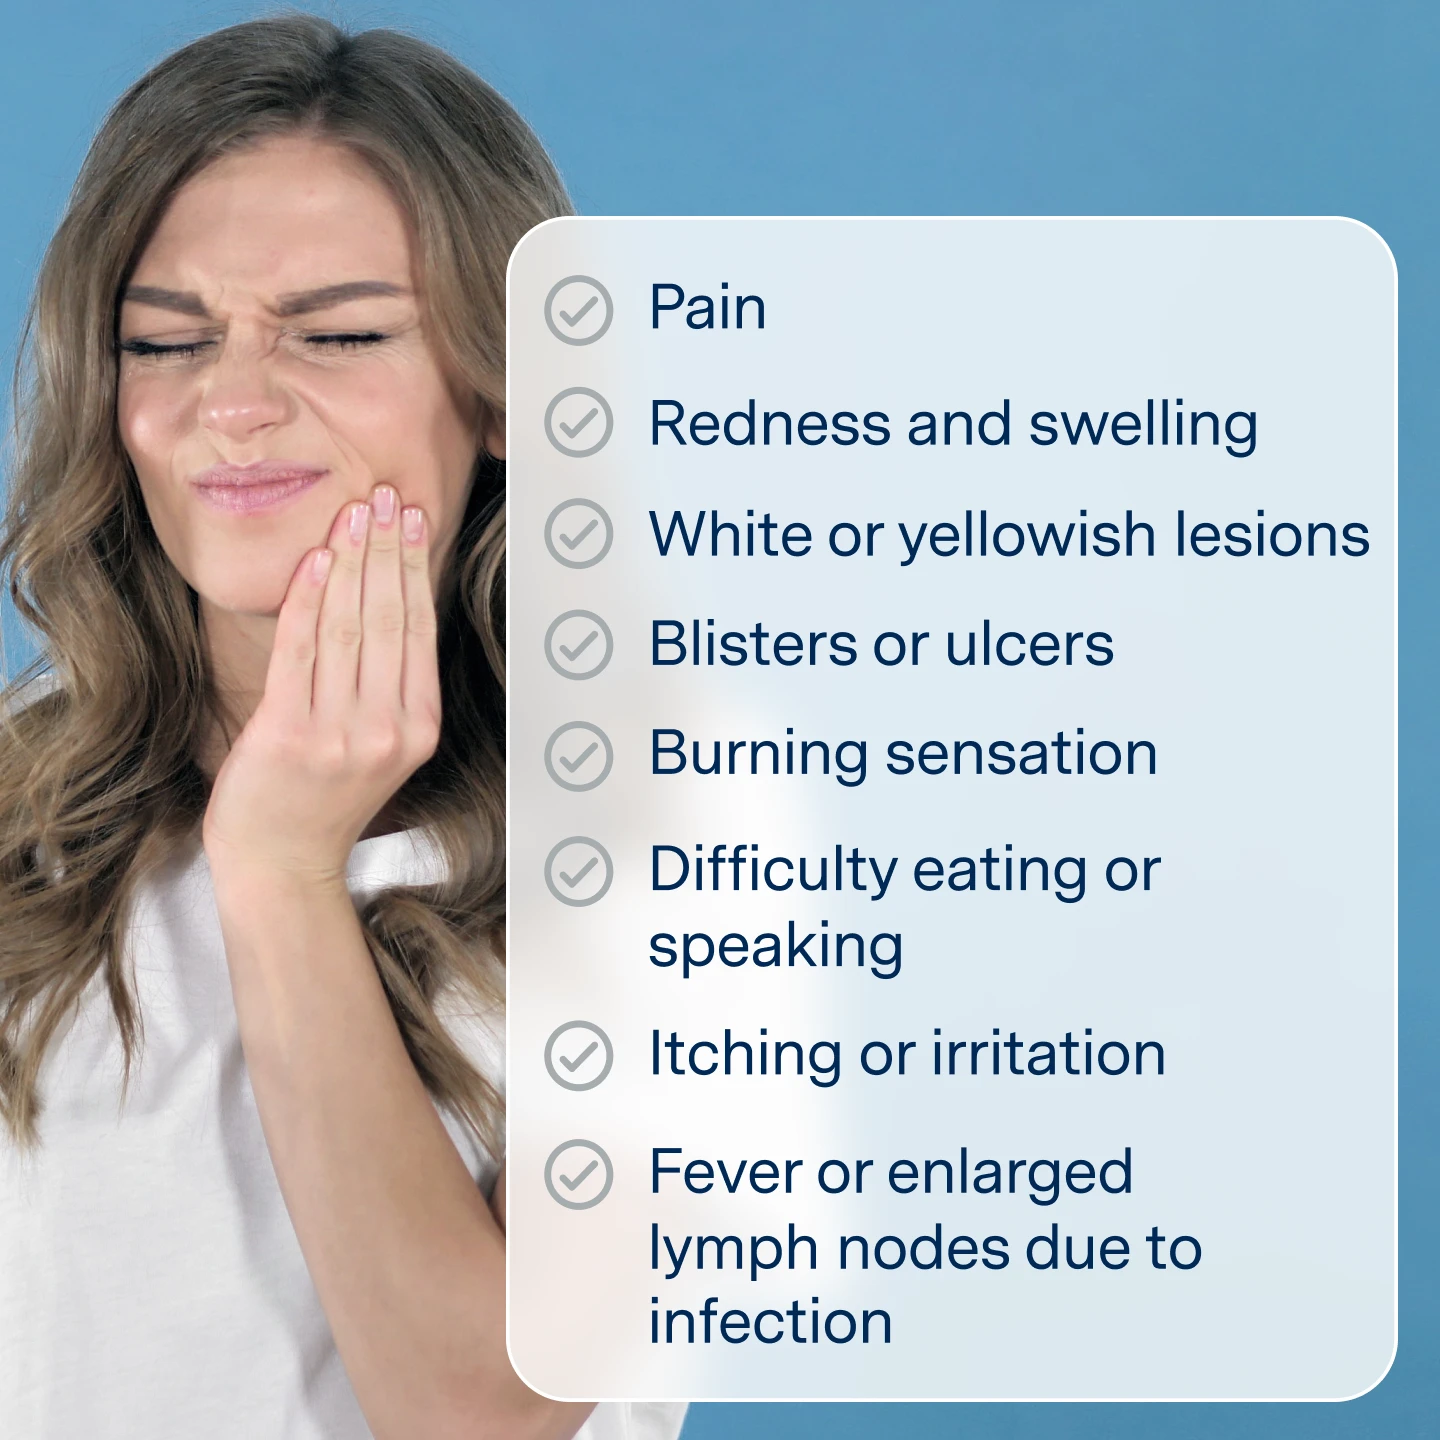 Mouth sores symptoms
Pain
Redness and swelling
White or yellow lesions
Blisters or ulcers
Burning sensation
Difficulty eating or speaking
Itching or irritation
Fever or enlarged lymph nodes due to infection